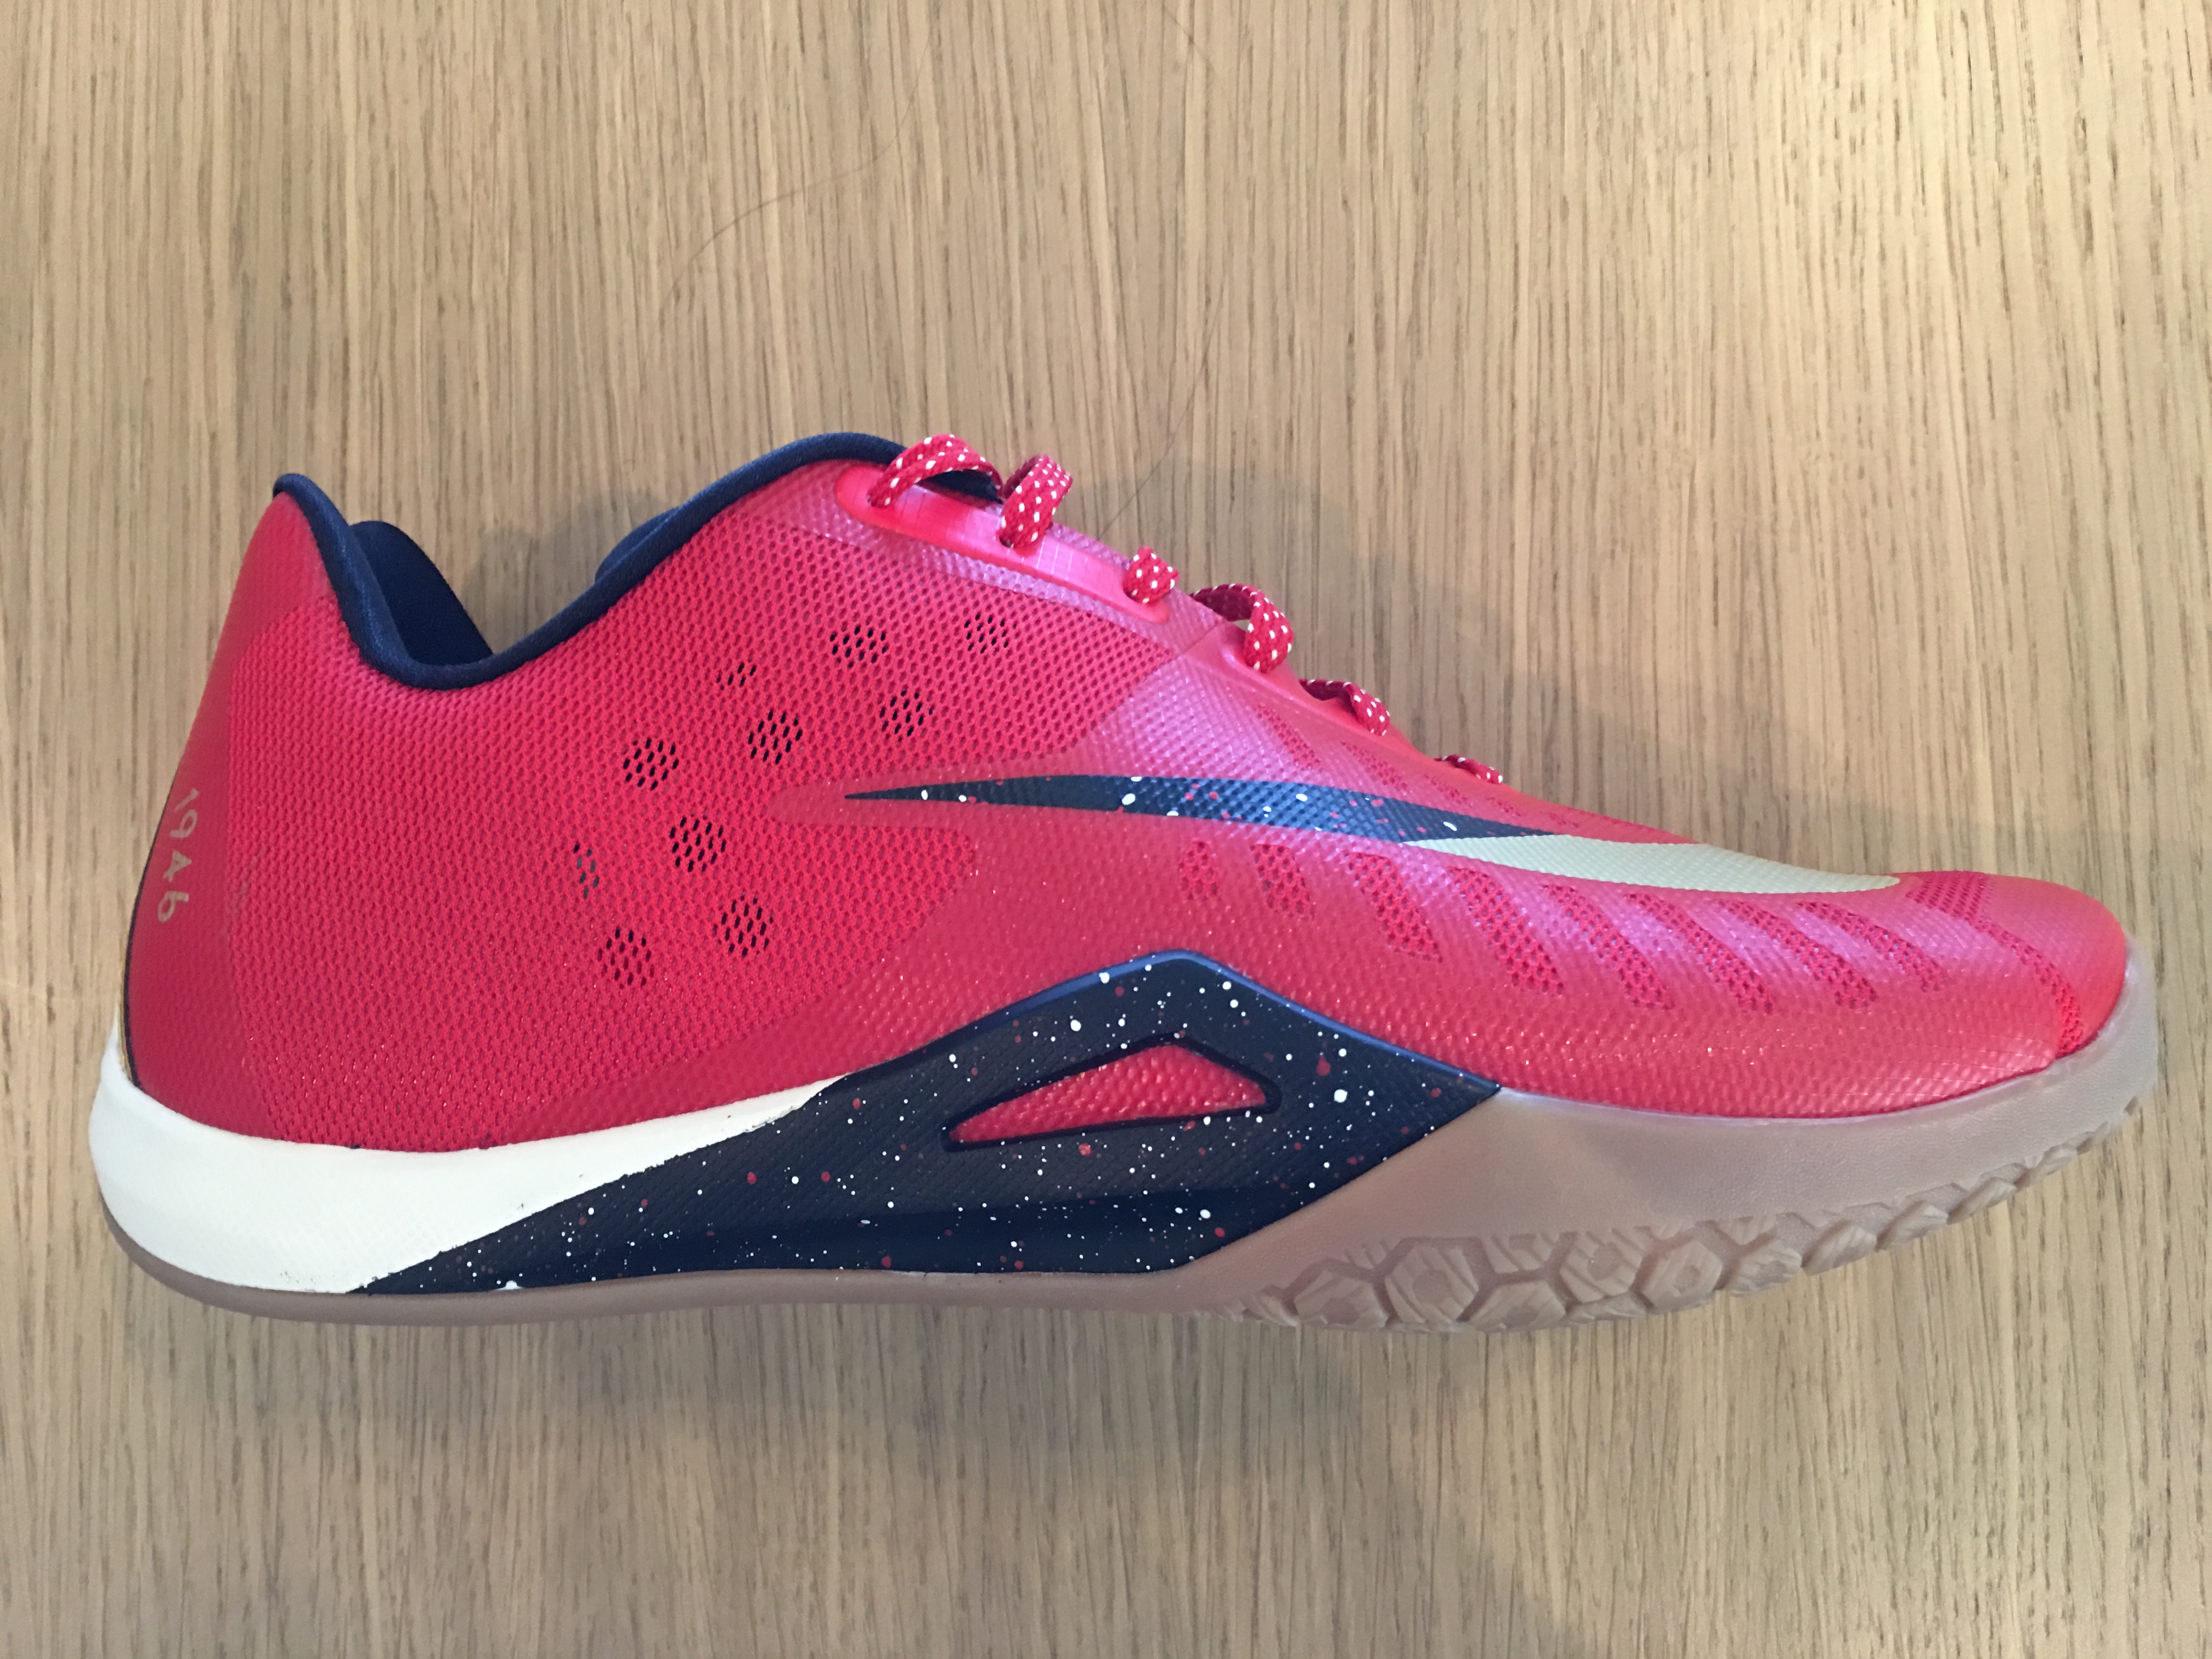 paul george shoes pink